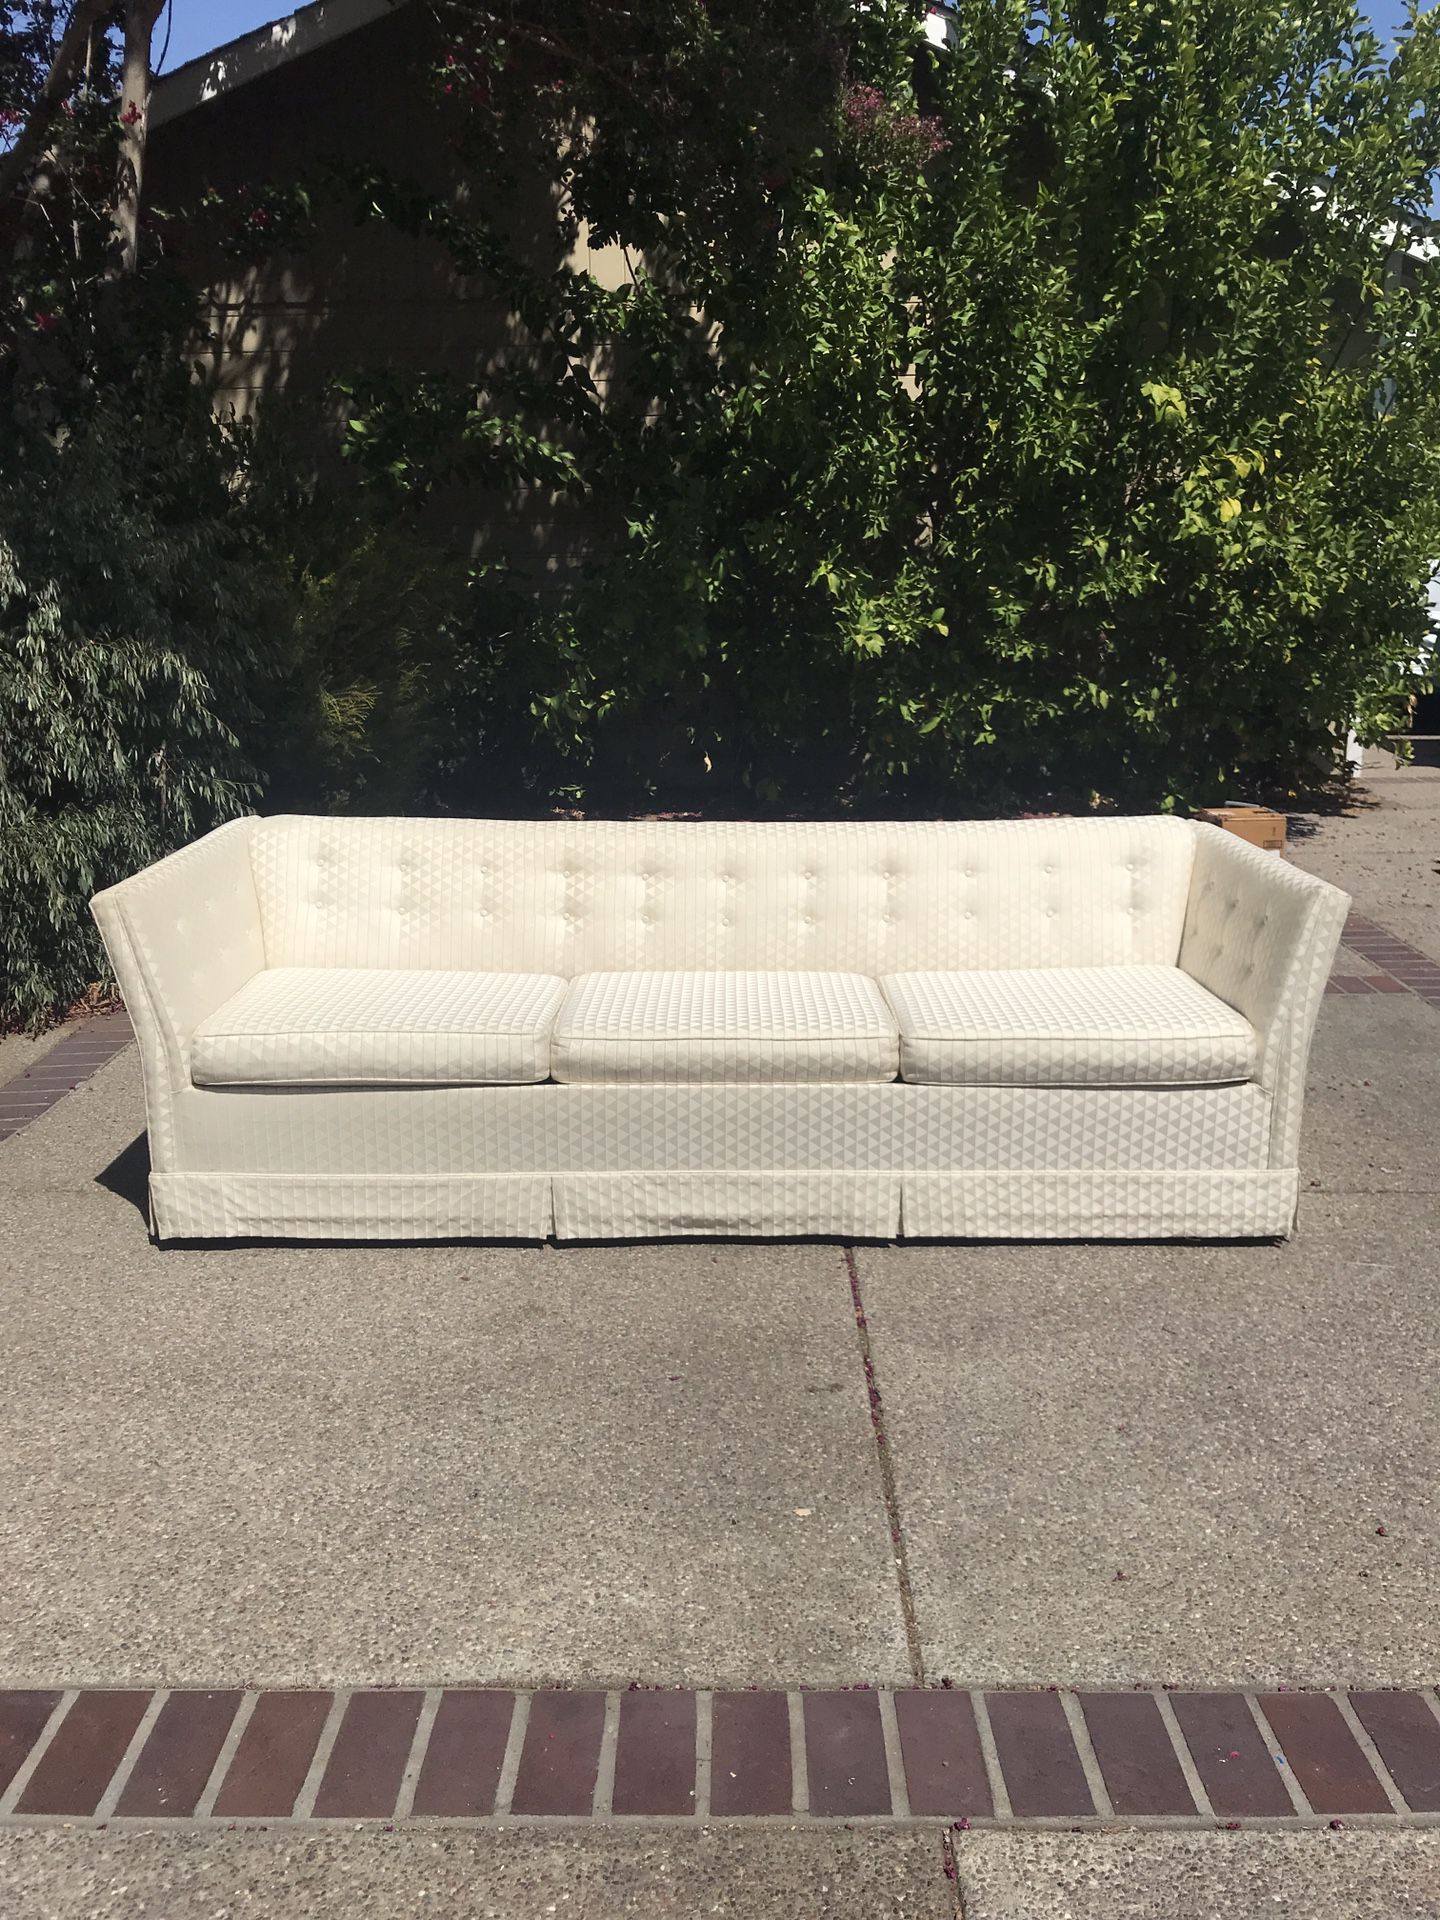 Vintage Mid Century Modern Sleeper Sofa Bed Pull Out Couch 